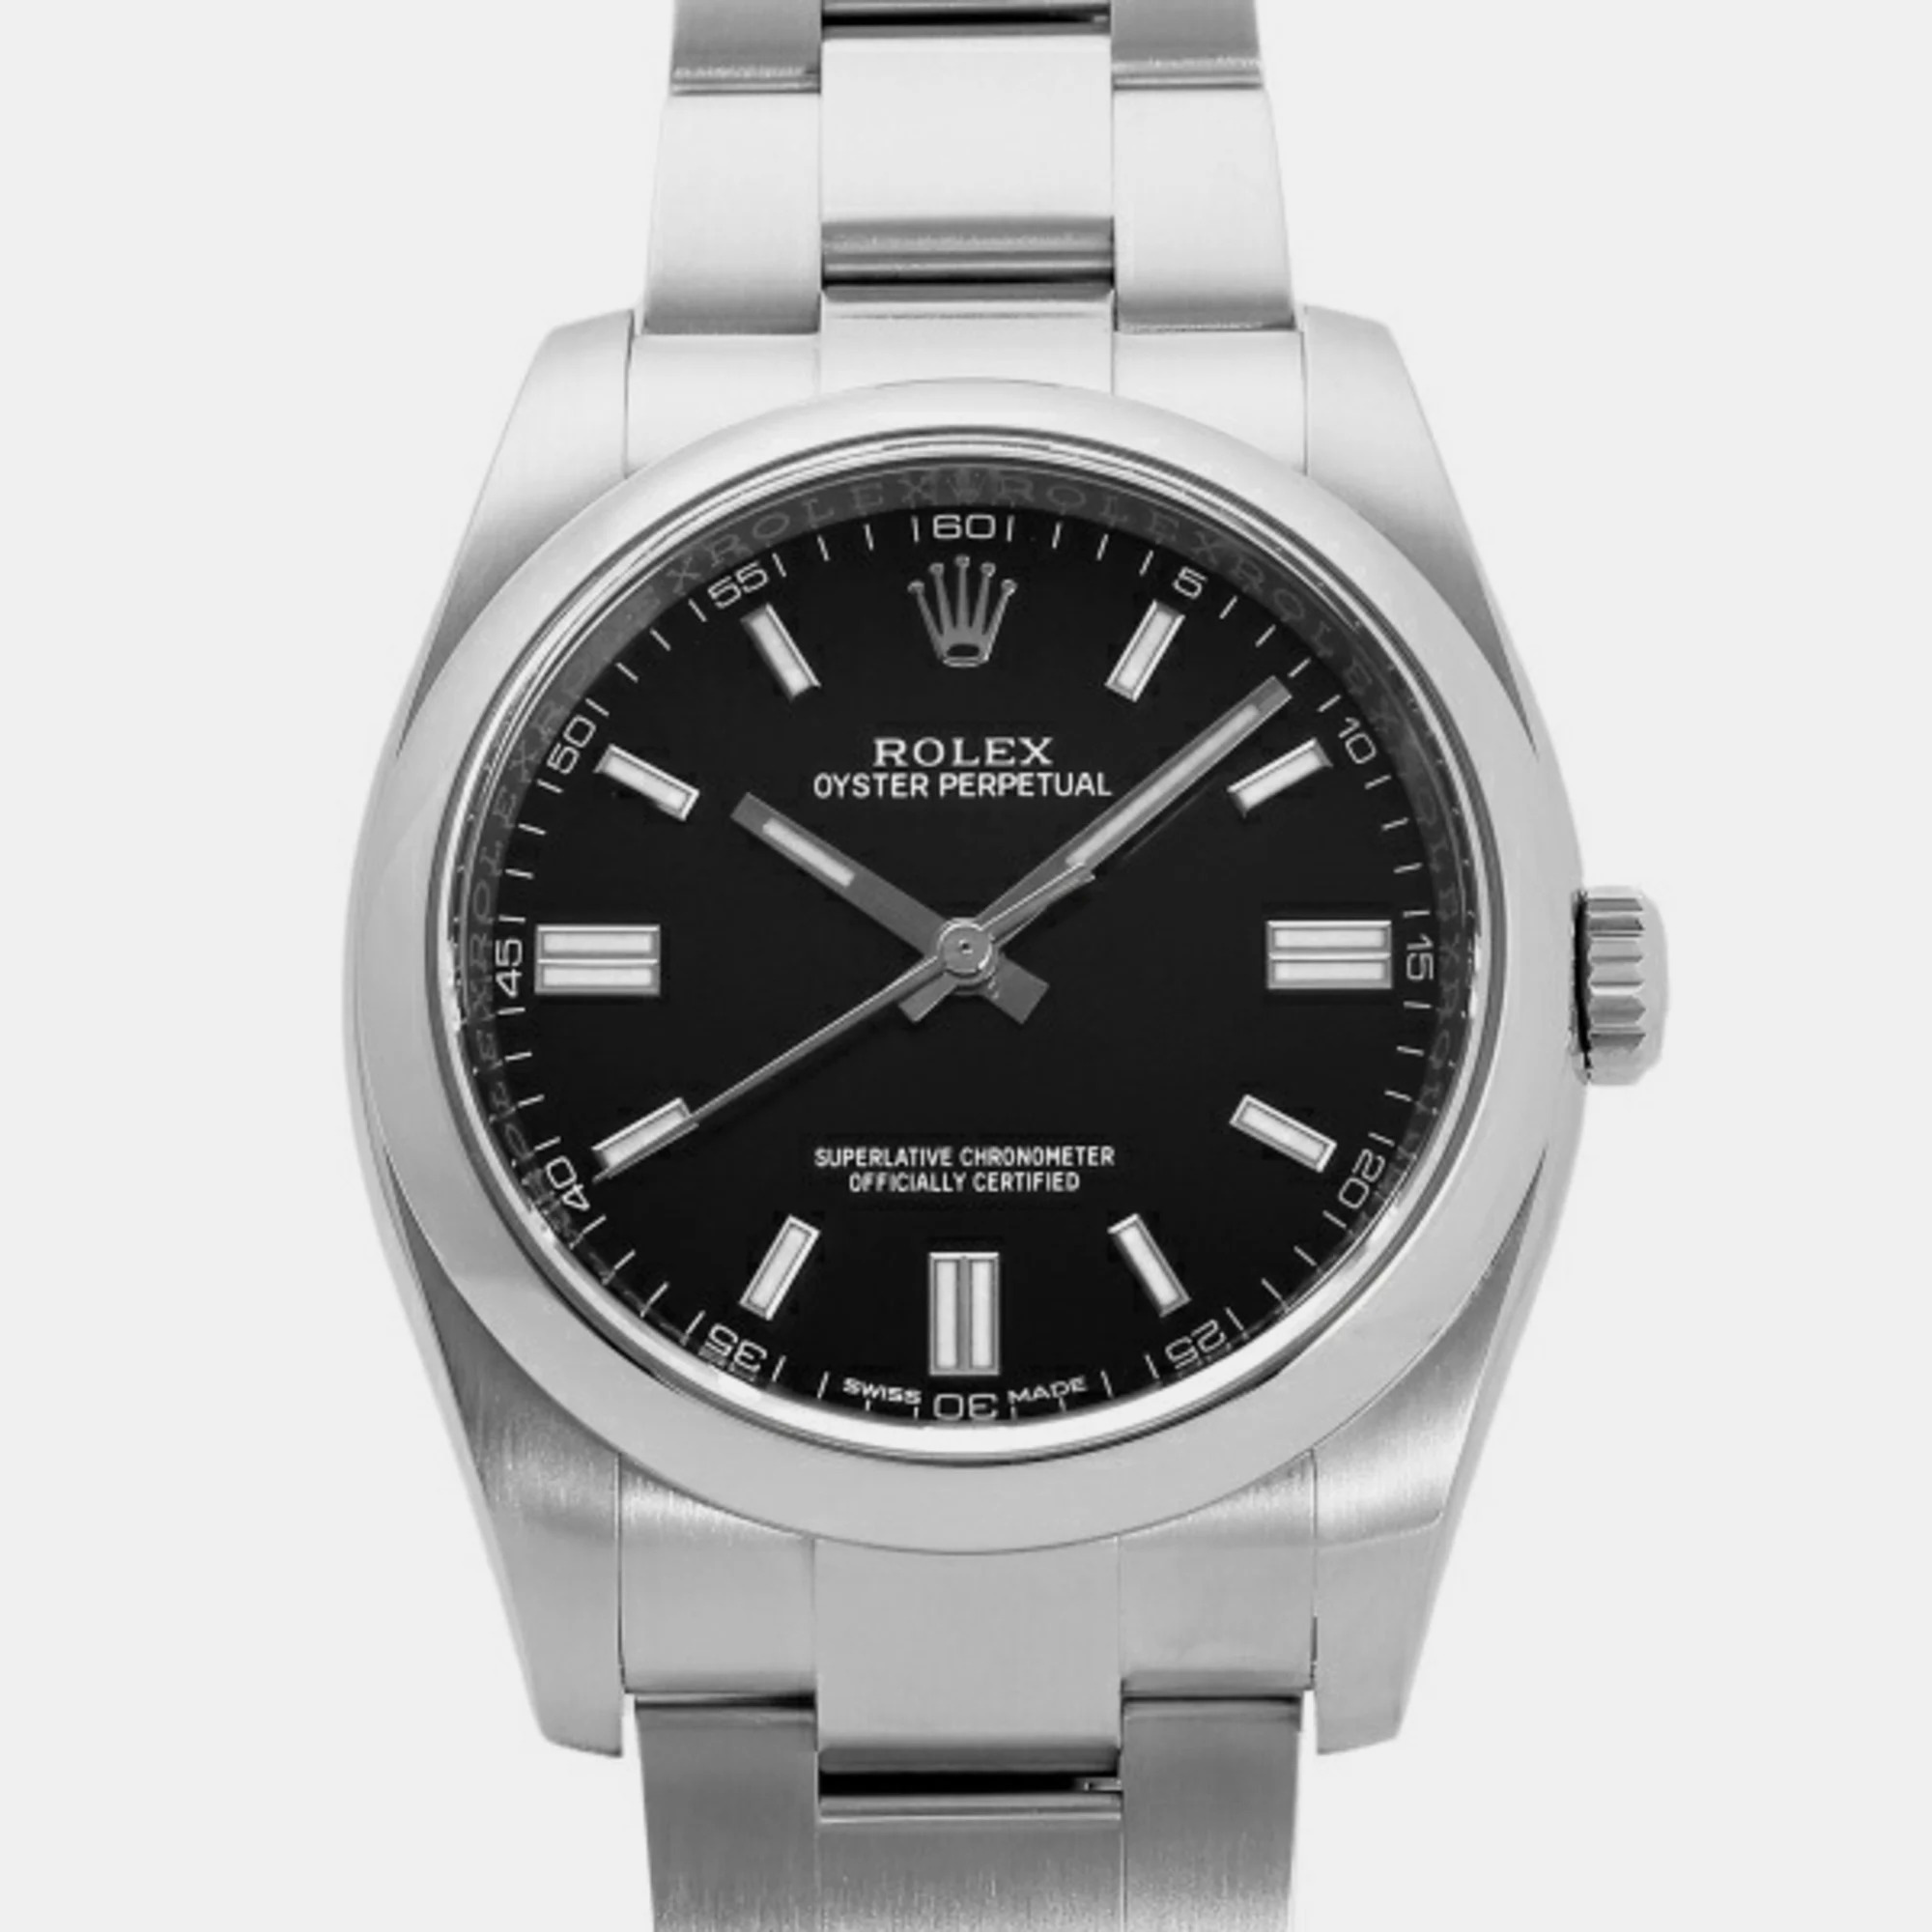 Rolex black stainless steel oyster perpetual 116000 automatic men's wristwatch 36 mm